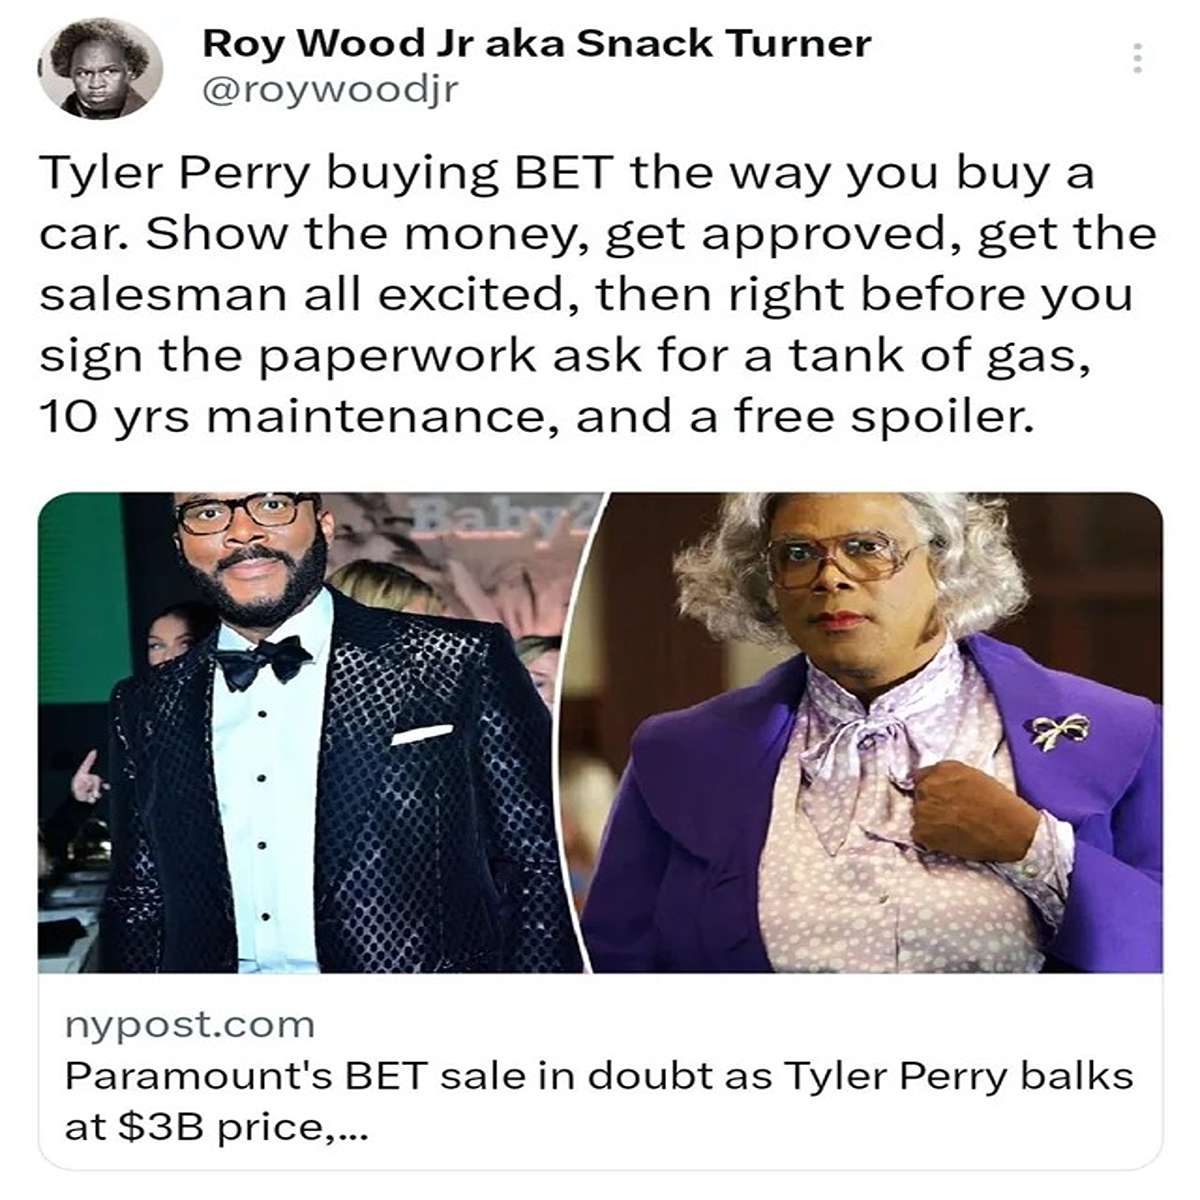 funny tweets and memes - photo caption - Roy Wood Jr aka Snack Turner Tyler Perry buying Bet the way you buy a car. Show the money, get approved, get the salesman all excited, then right before you sign the paperwork ask for a tank of gas, 10 yrs maintena